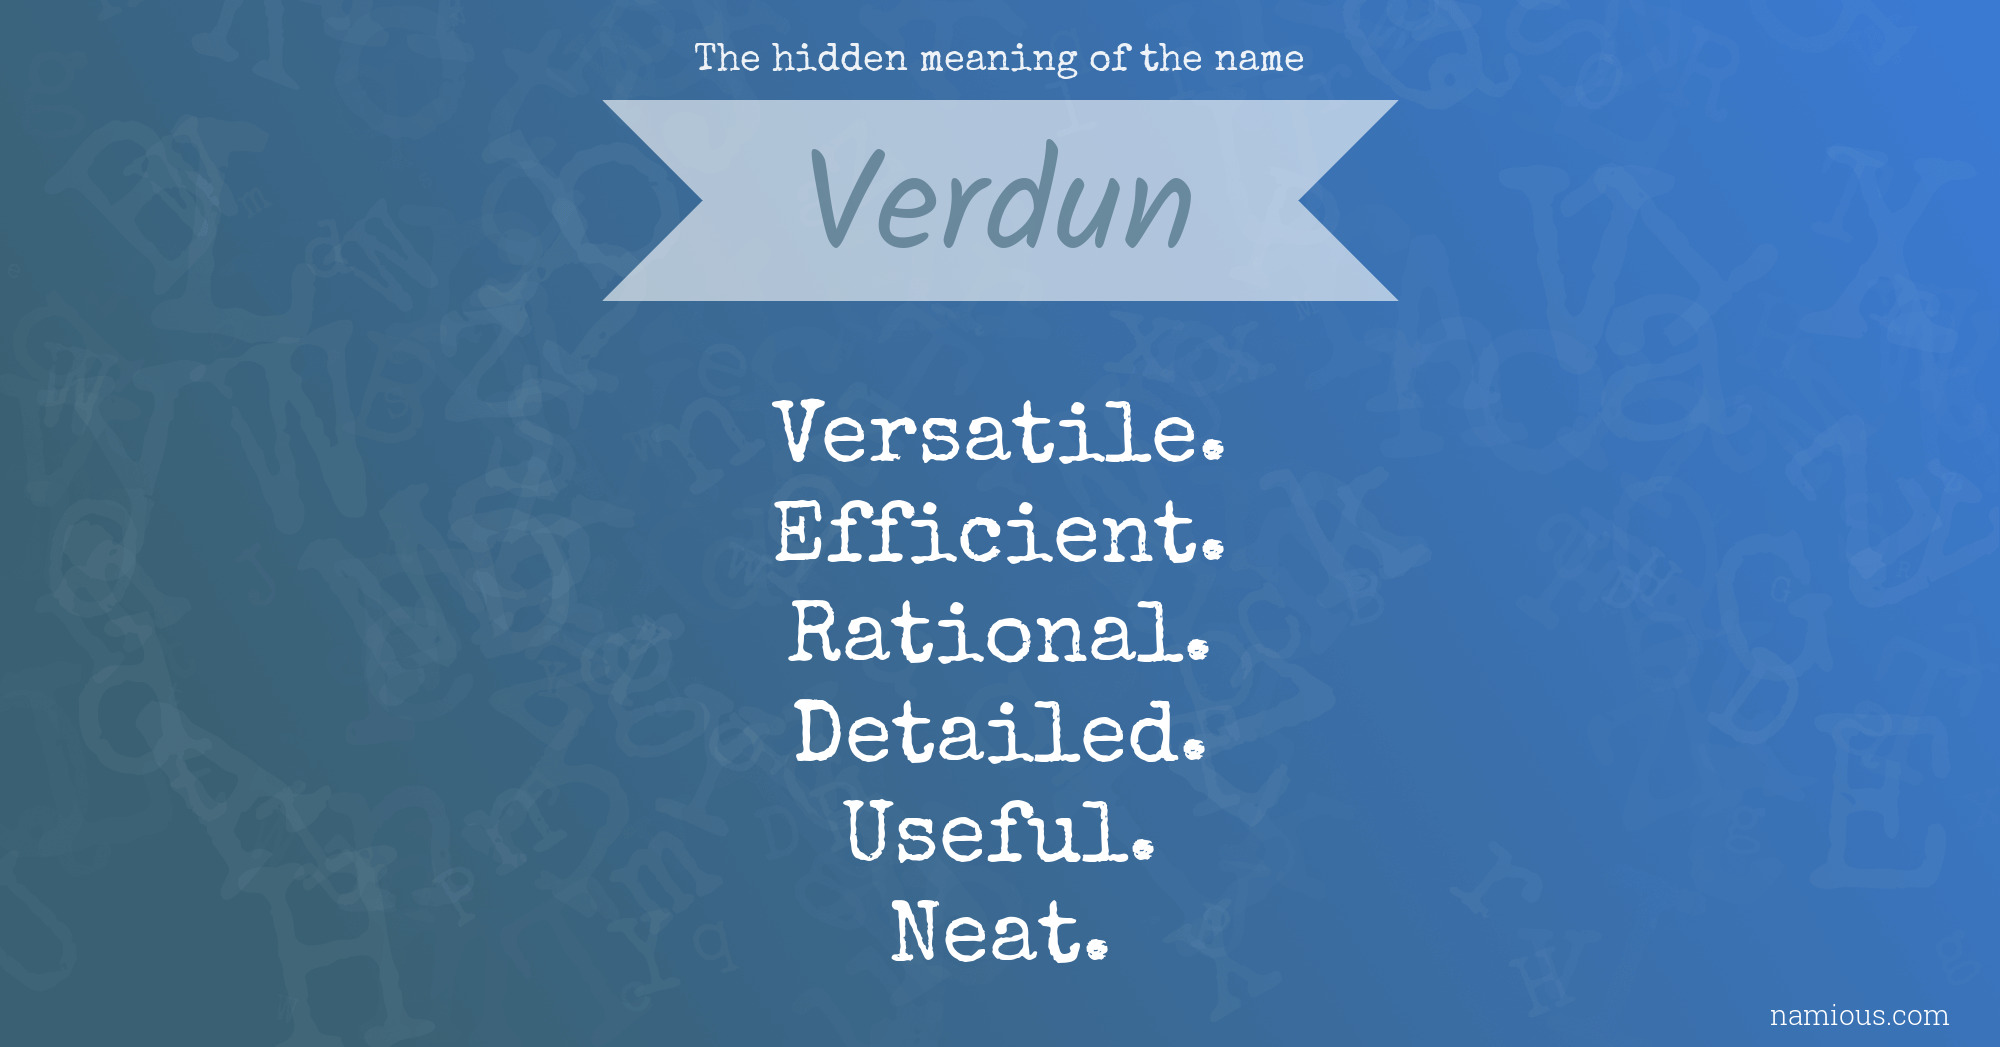 The hidden meaning of the name Verdun